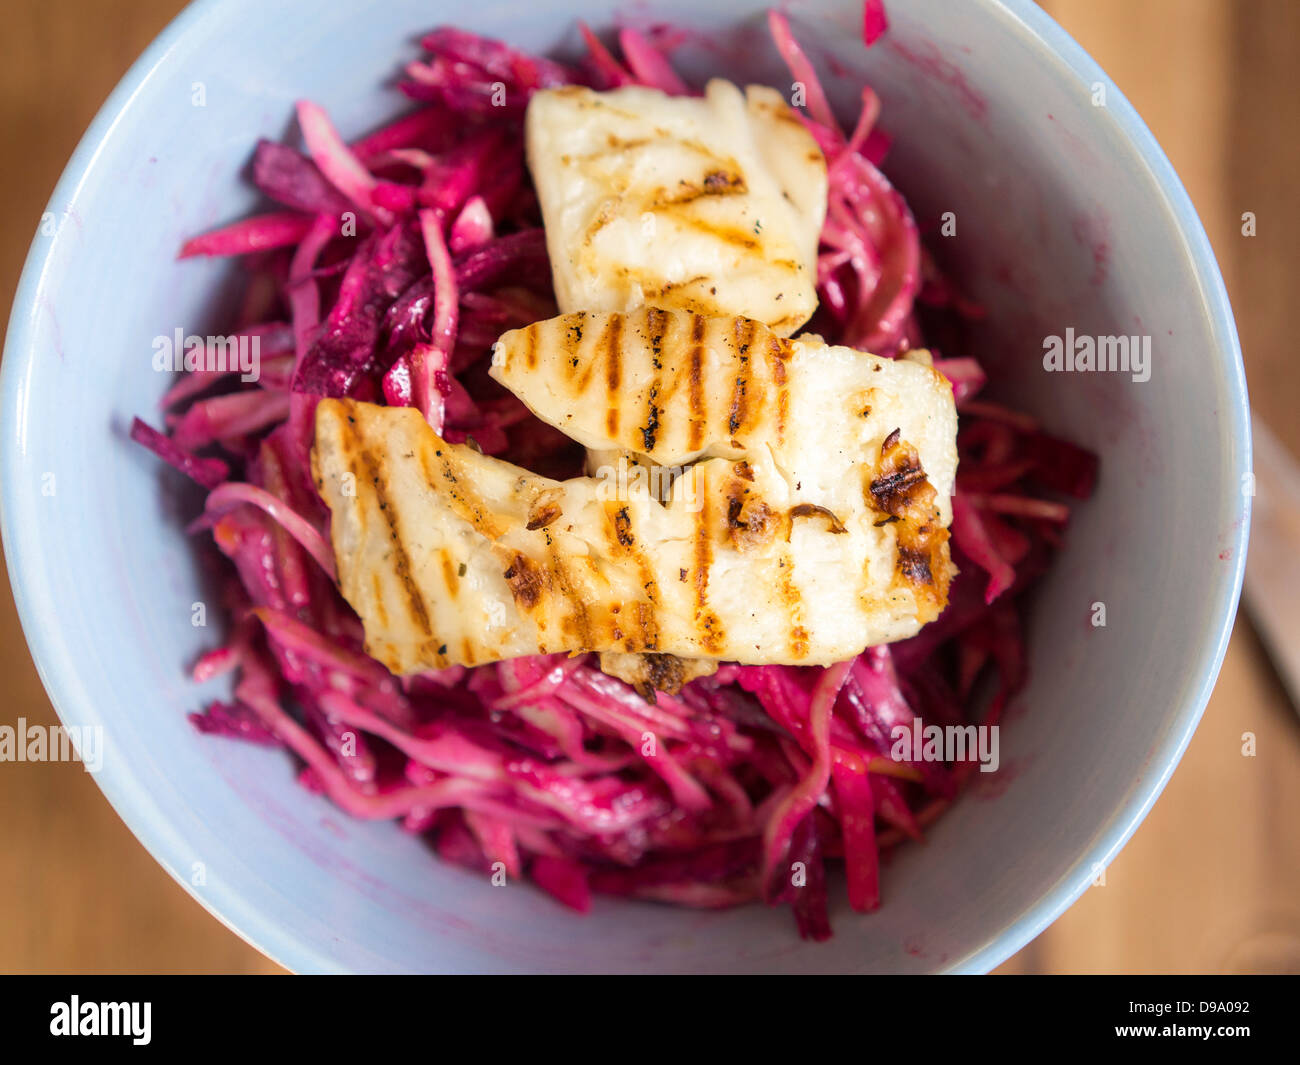 Raw cabbage, apple and beetroot slaw dressed in rice vinegar with grilled halloumi cheese Stock Photo